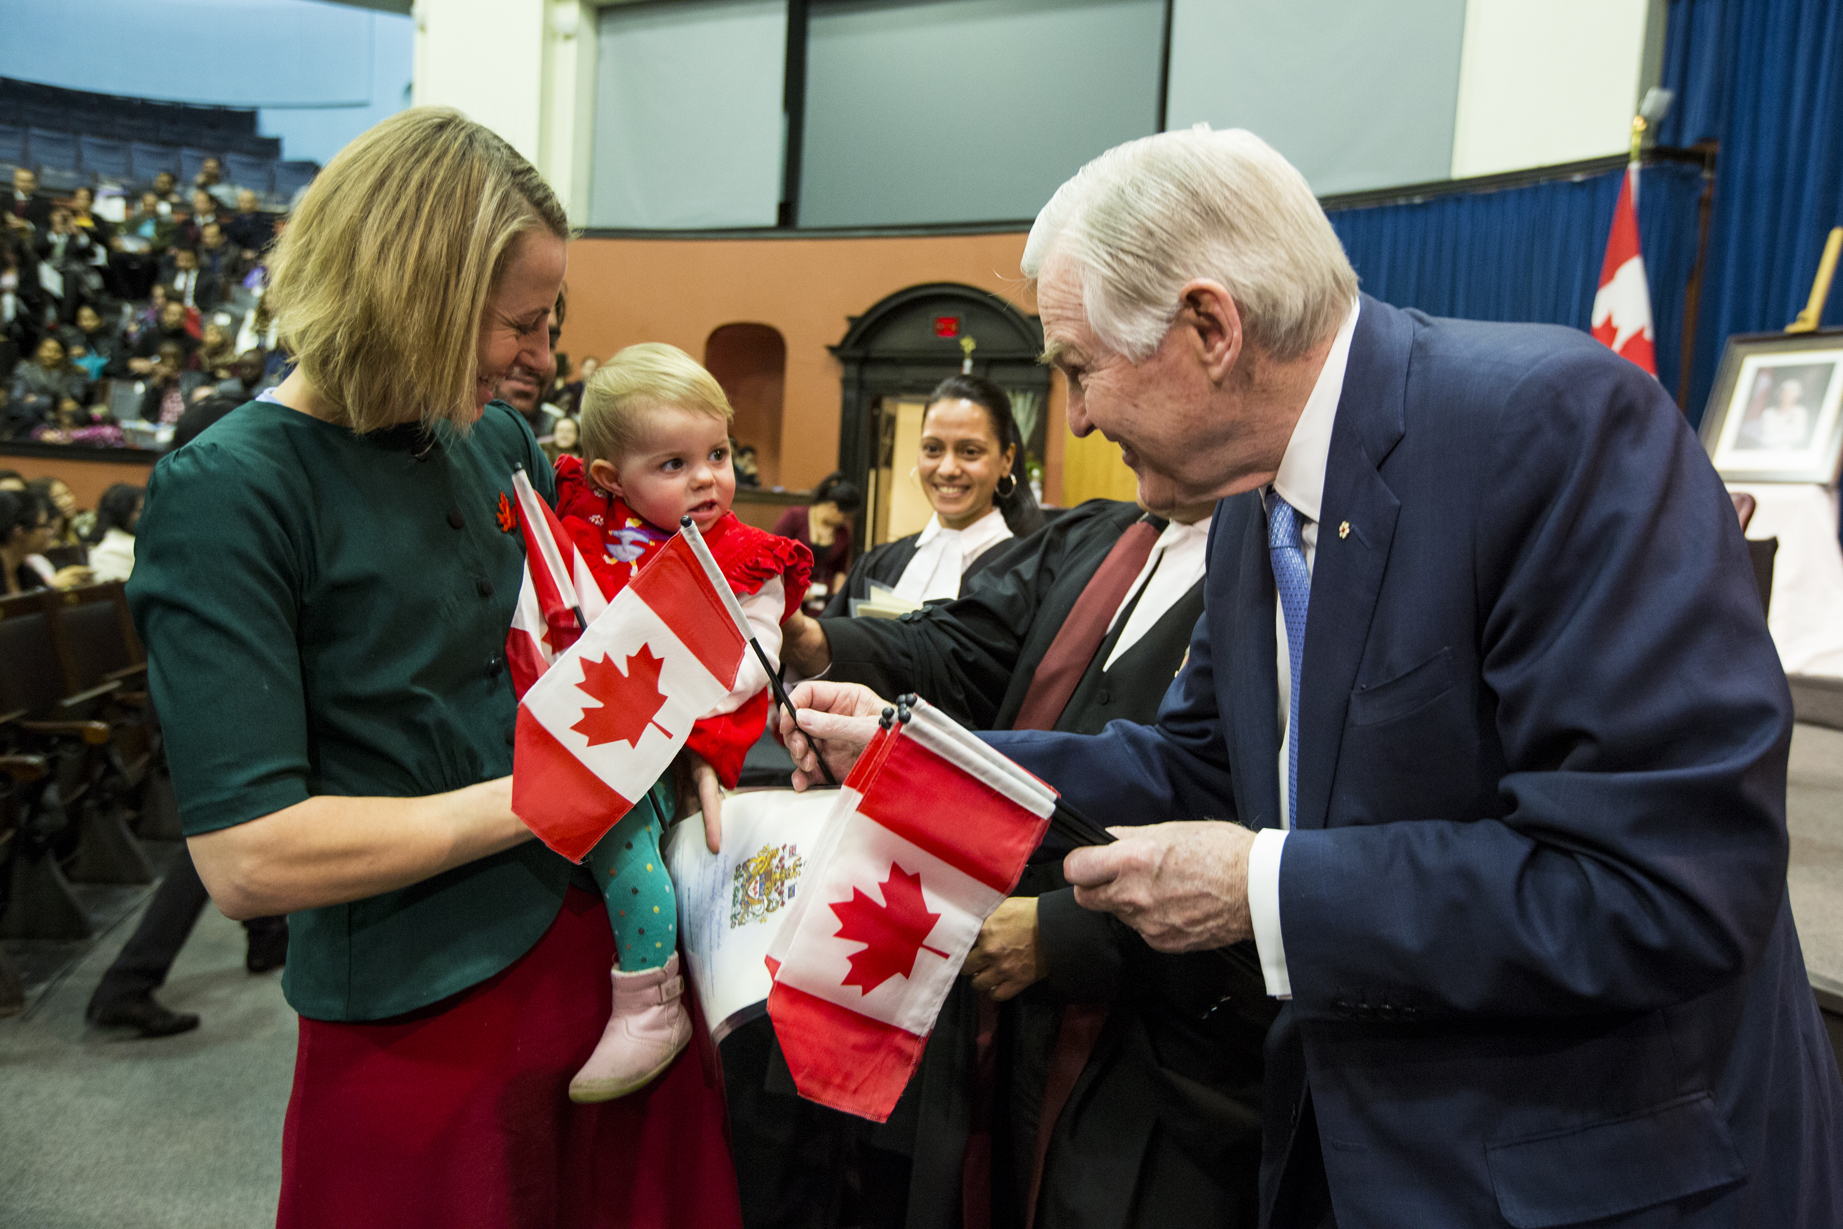 Chancellor Wilson greets members of the audience at the Citizenship Ceremony held in Convocation Hall on Feb. 6, 2016.